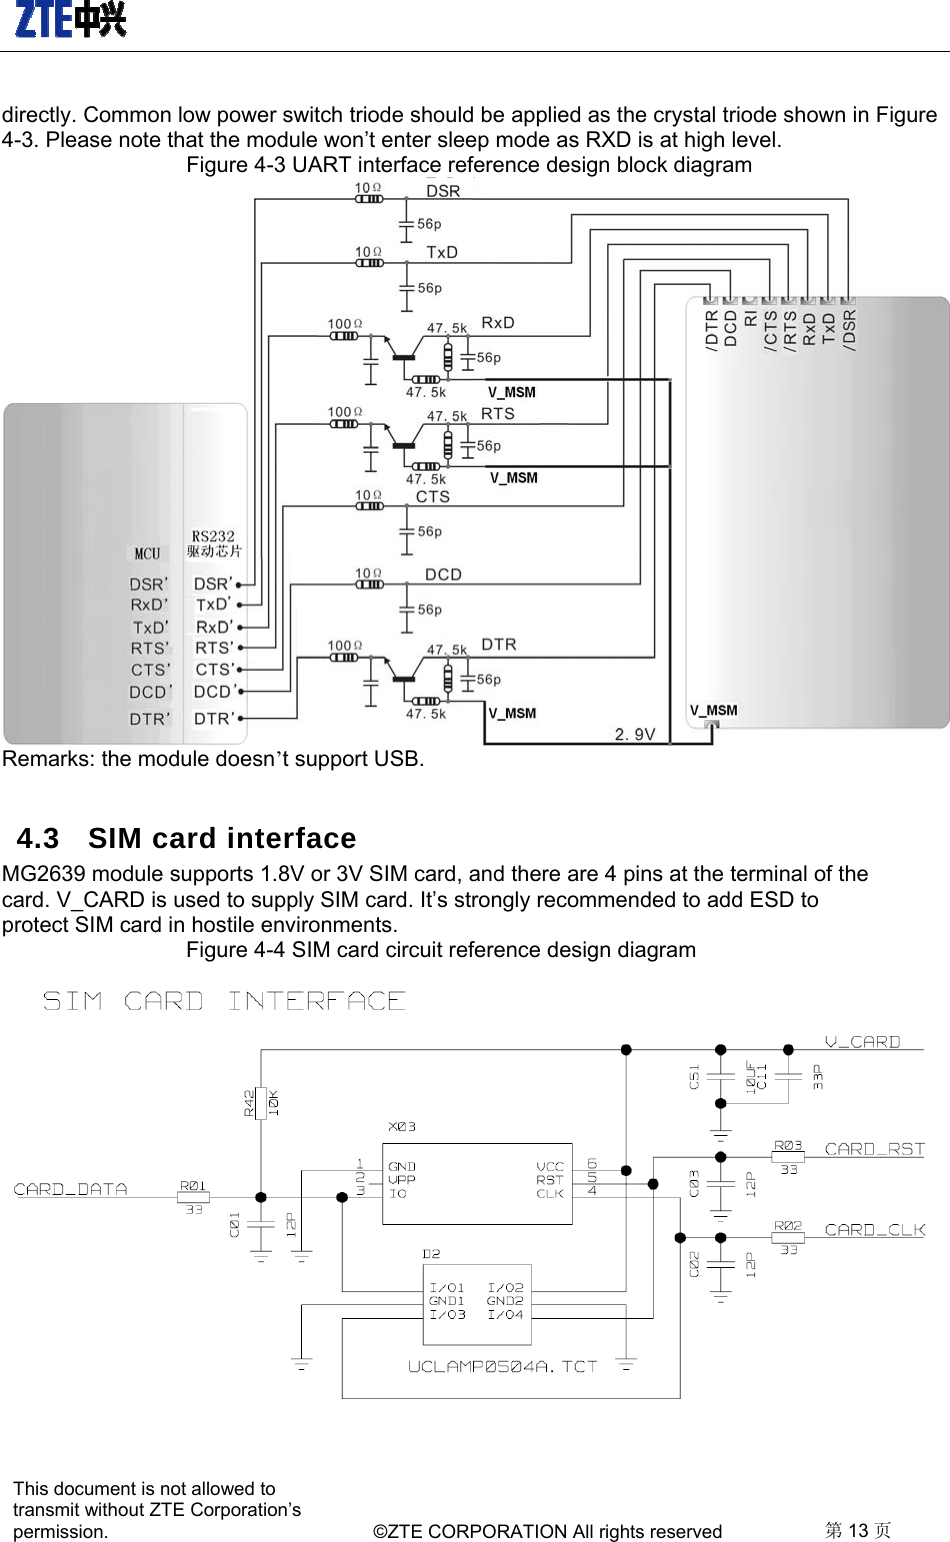   This document is not allowed to transmit without ZTE Corporation’s permission.    ©ZTE CORPORATION All rights reserved  第13 页  directly. Common low power switch triode should be applied as the crystal triode shown in Figure 4-3. Please note that the module won’t enter sleep mode as RXD is at high level.     Figure 4-3 UART interface reference design block diagram    Remarks: the module doesn’t support USB.     4.3  SIM card interface MG2639 module supports 1.8V or 3V SIM card, and there are 4 pins at the terminal of the card. V_CARD is used to supply SIM card. It’s strongly recommended to add ESD to protect SIM card in hostile environments.     Figure 4-4 SIM card circuit reference design diagram     